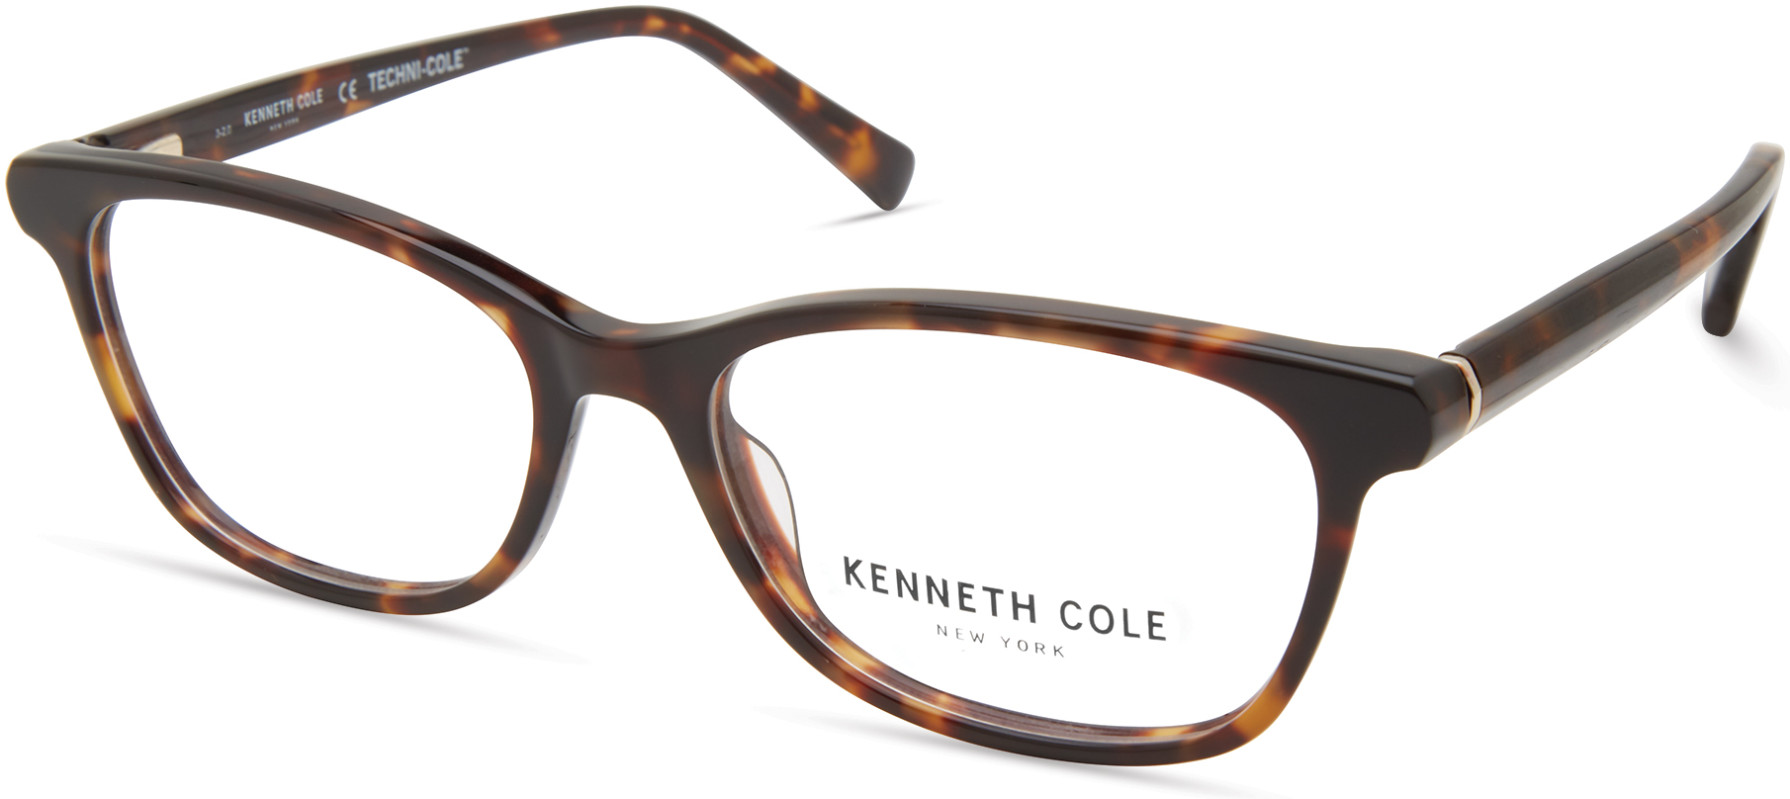 KENNETH COLE NY 0326 052